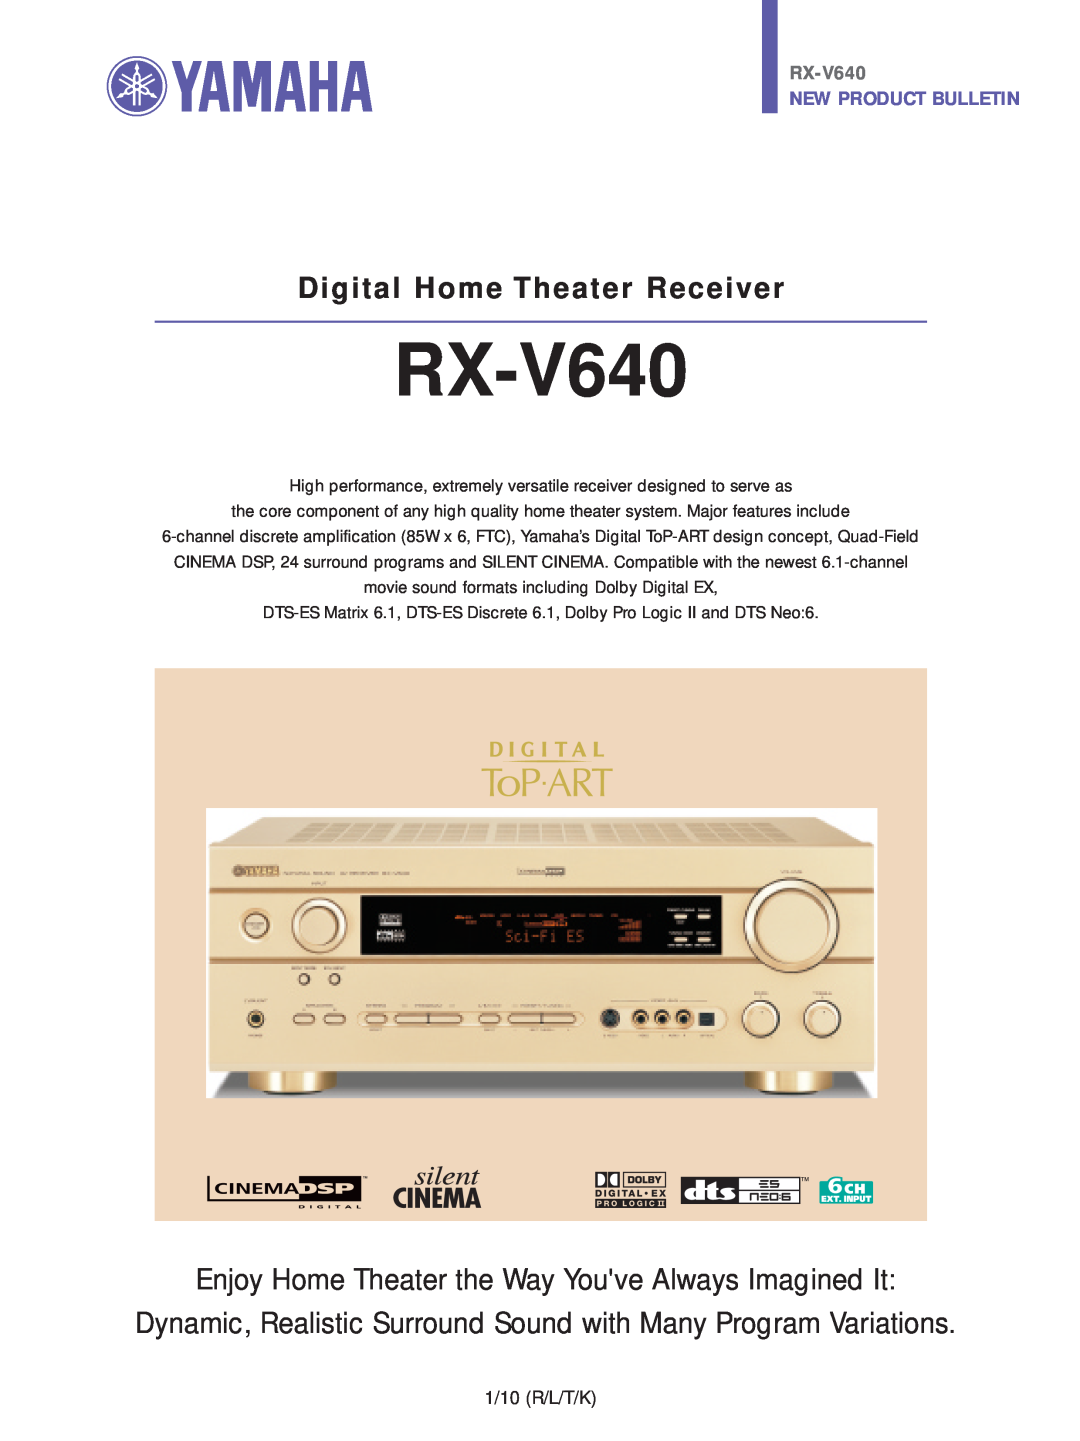 Yamaha RX-V640 manual Enjoy Home Theater the Way Youve Always Imagined It, New Product Bulletin, 1/10 R/L/T/K 